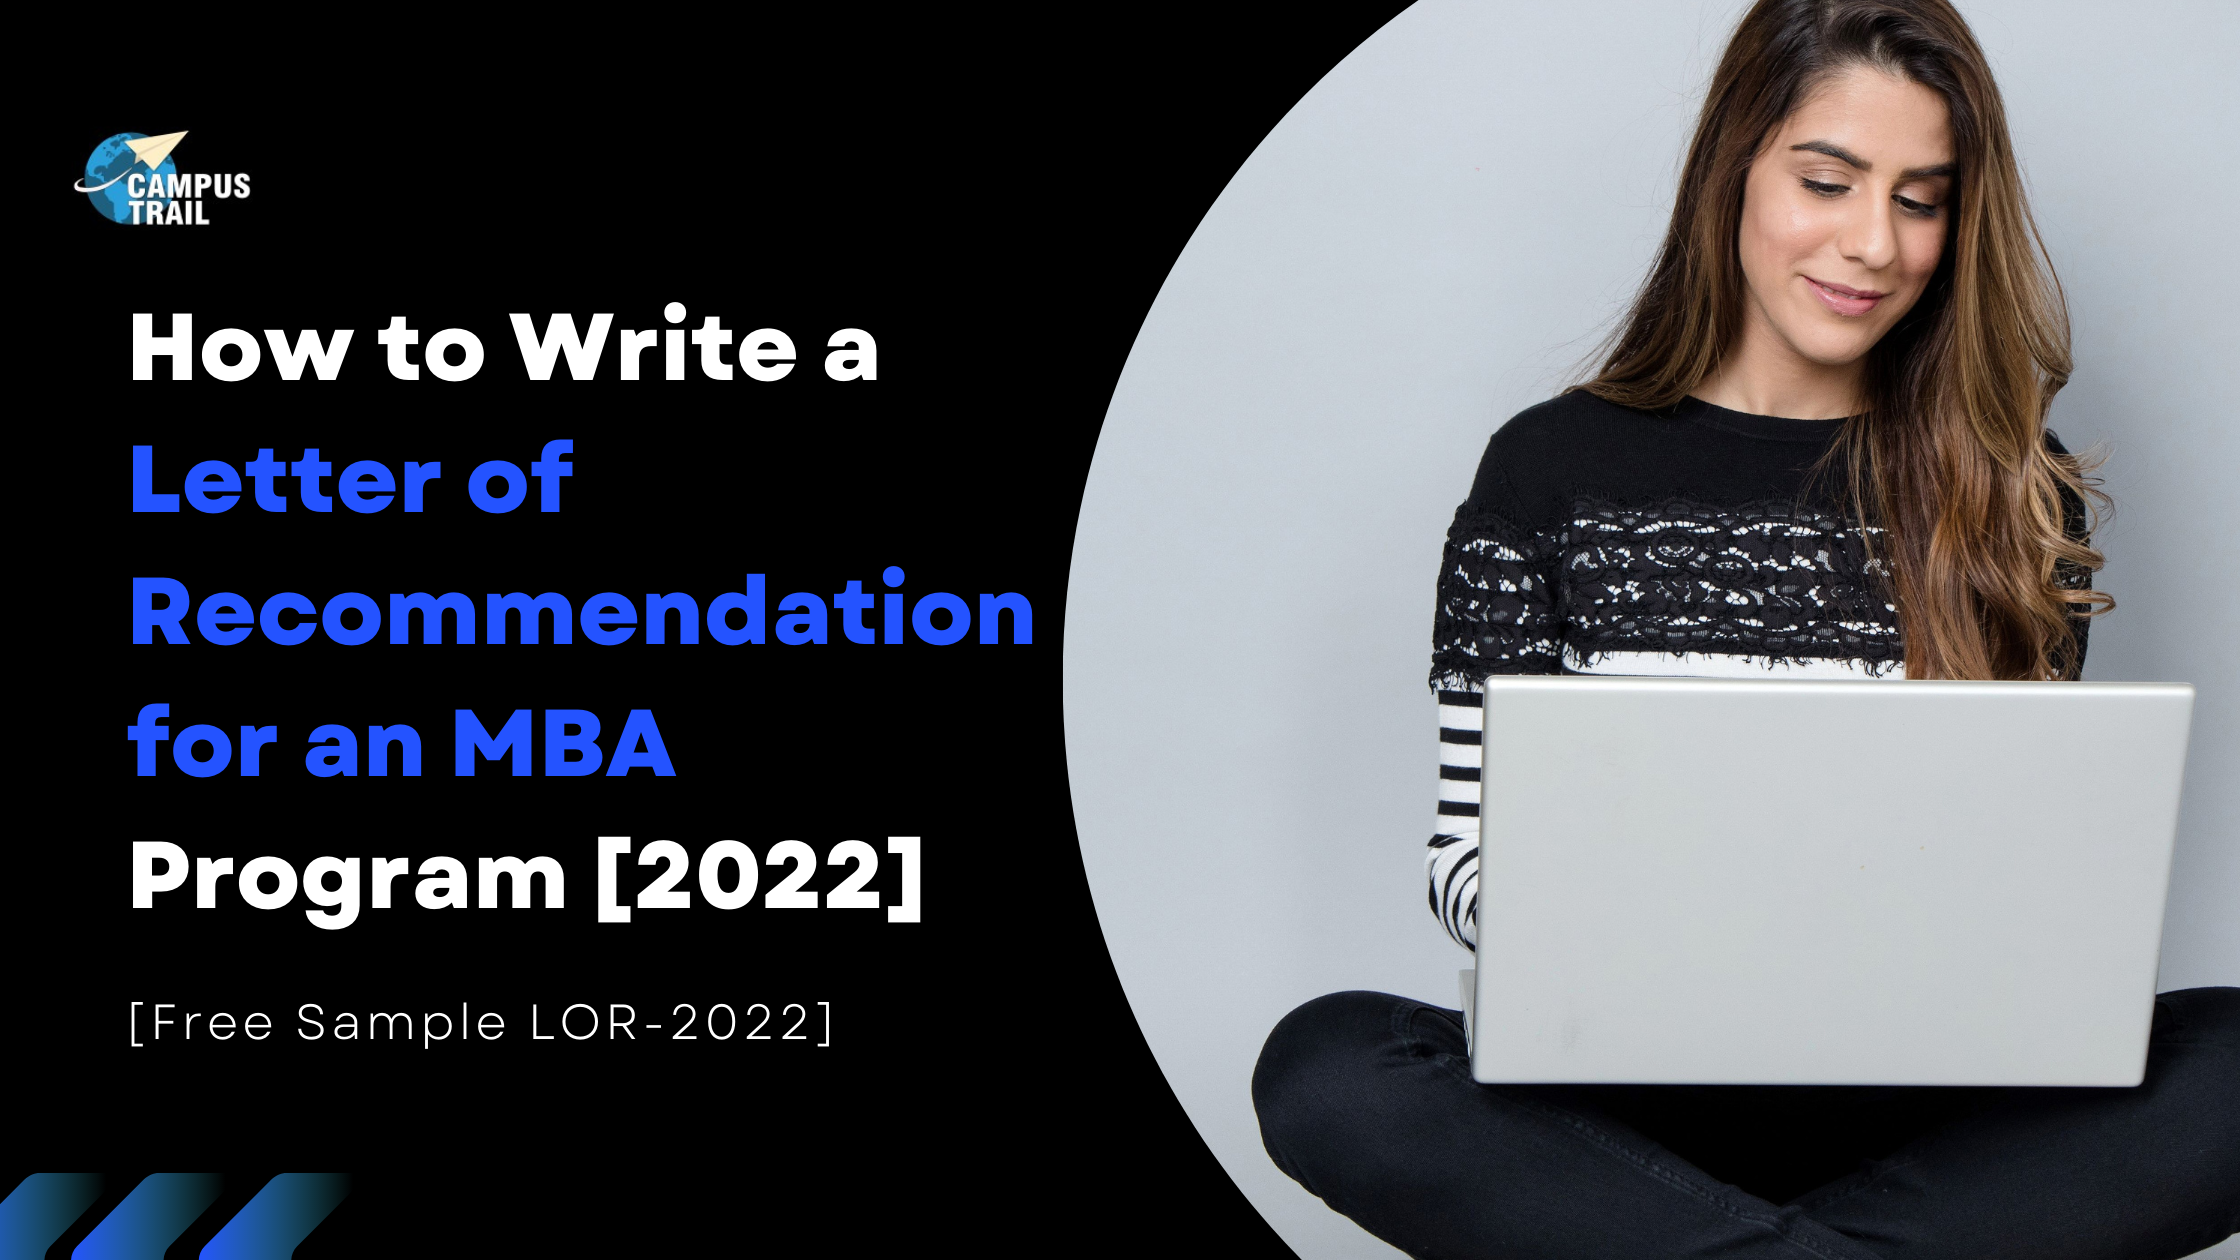 How to Write a Letter of Recommendation for an MBA Program [2022]